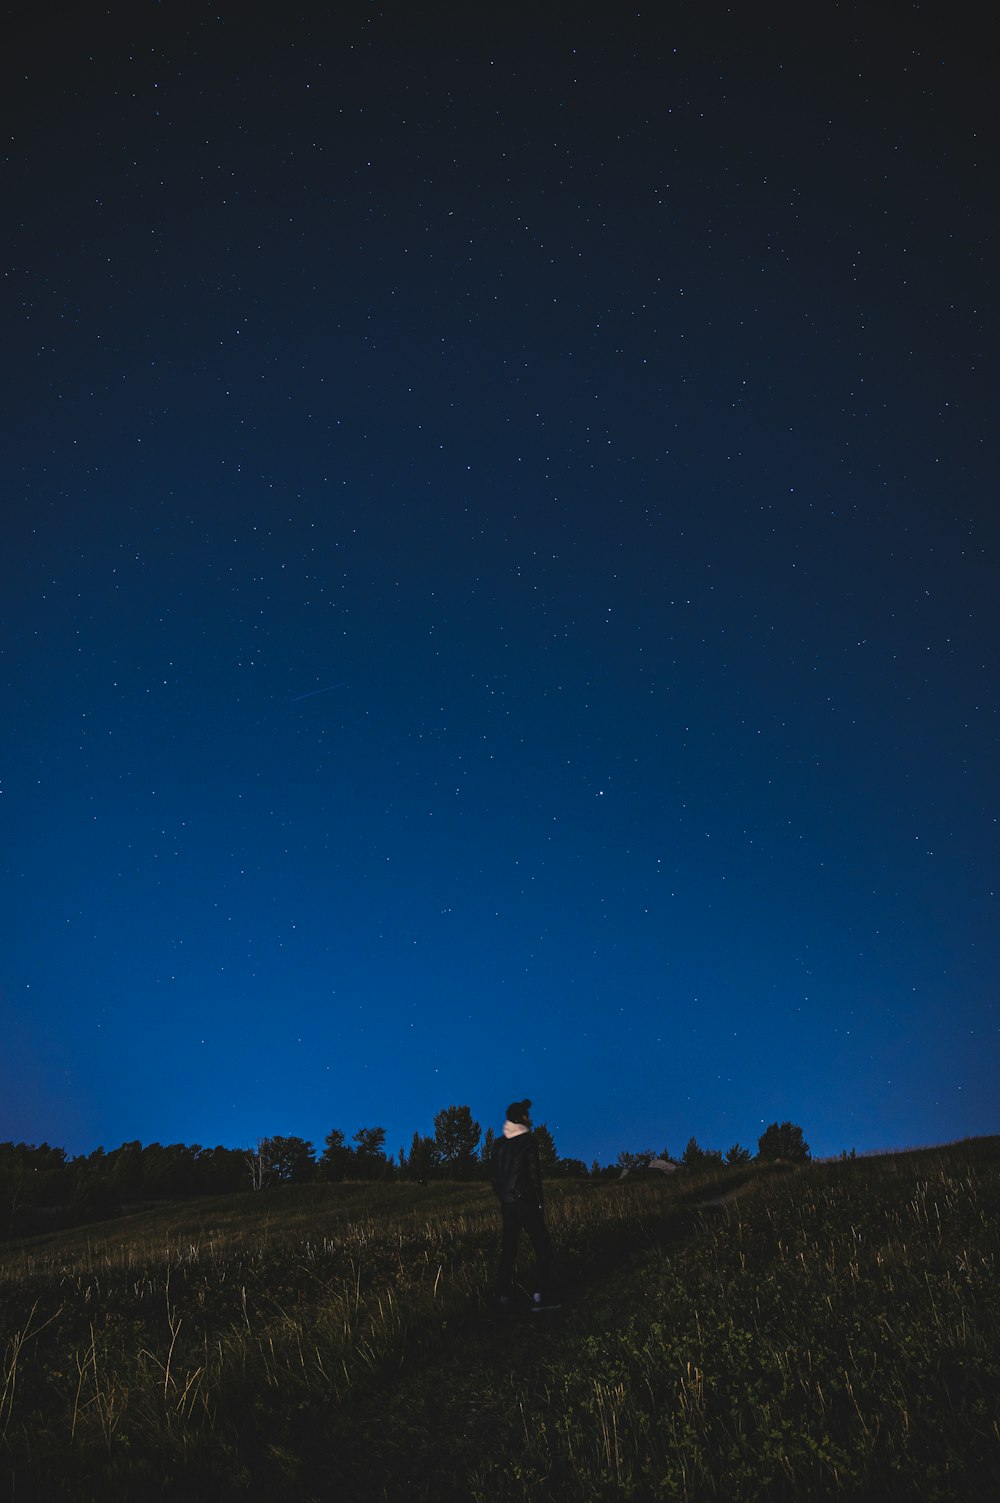 silhouette of people standing on hill under blue sky during night time